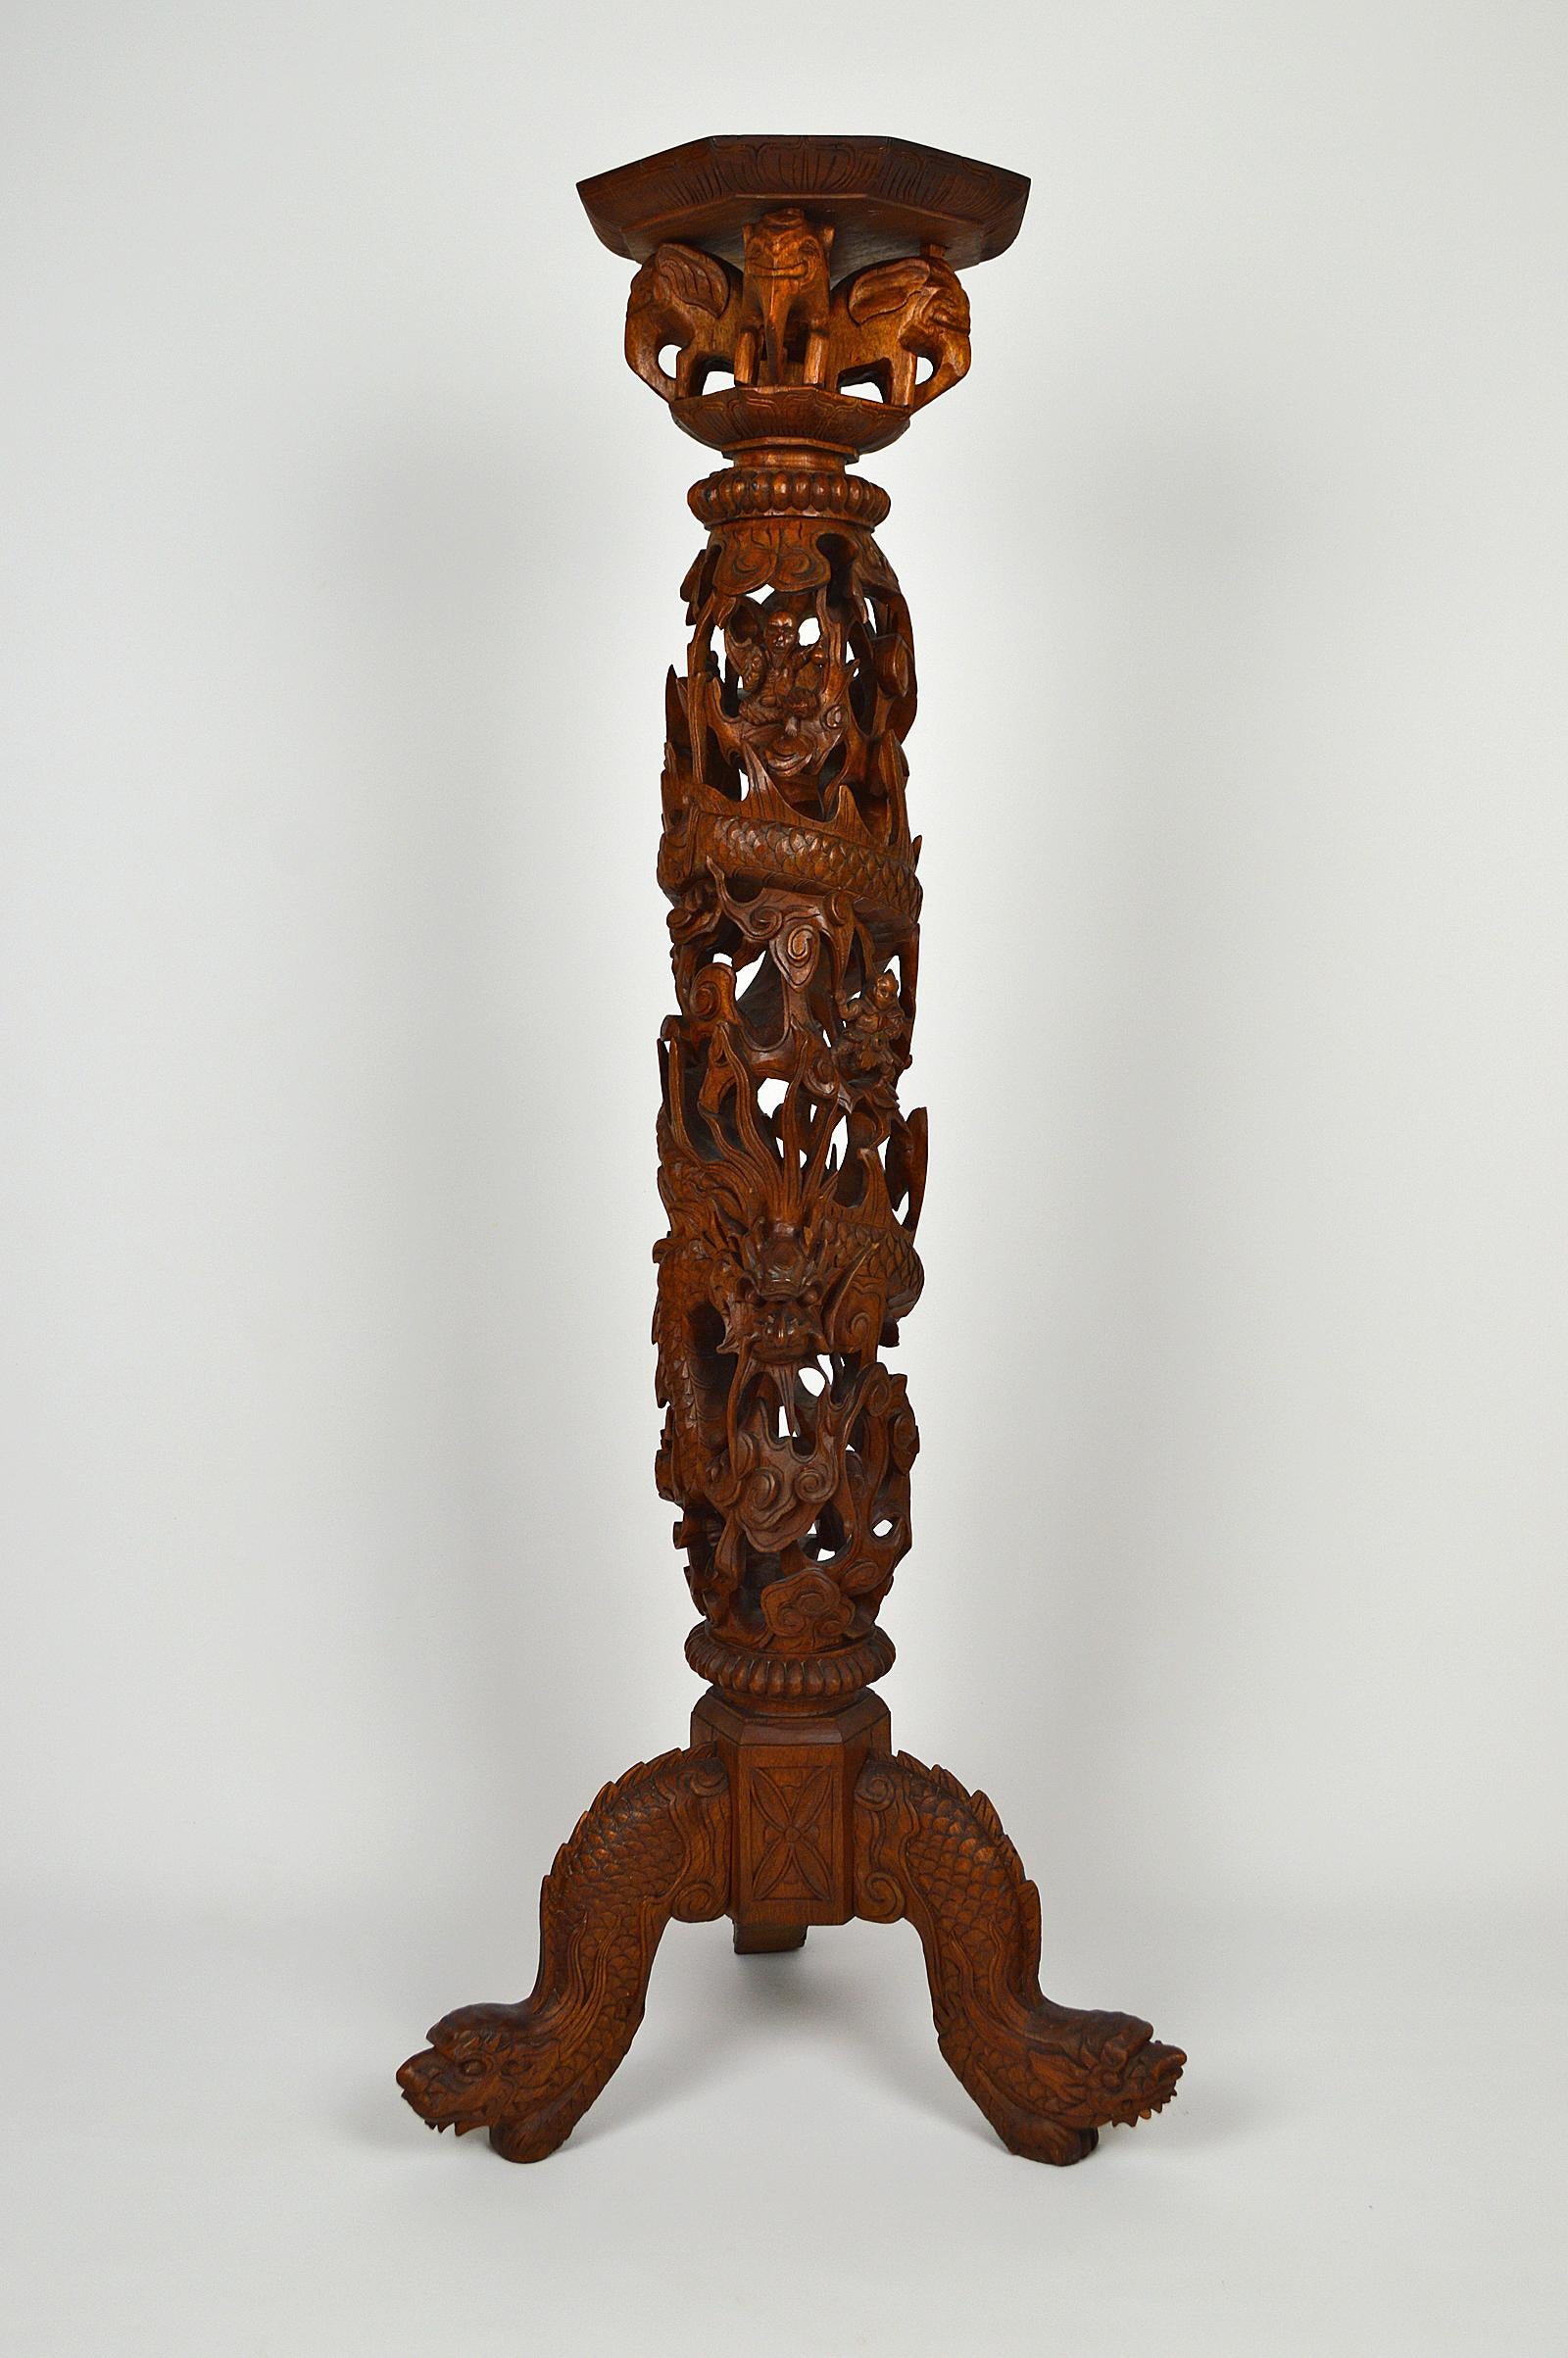 Superb Asian high pedestal table in solid wood richly carved. 

The tripod base is composed of 3 heads of dragons / demons.
In the center, a dragon walks on clouds. He is surrounded by 3 small characters, the San Xing (